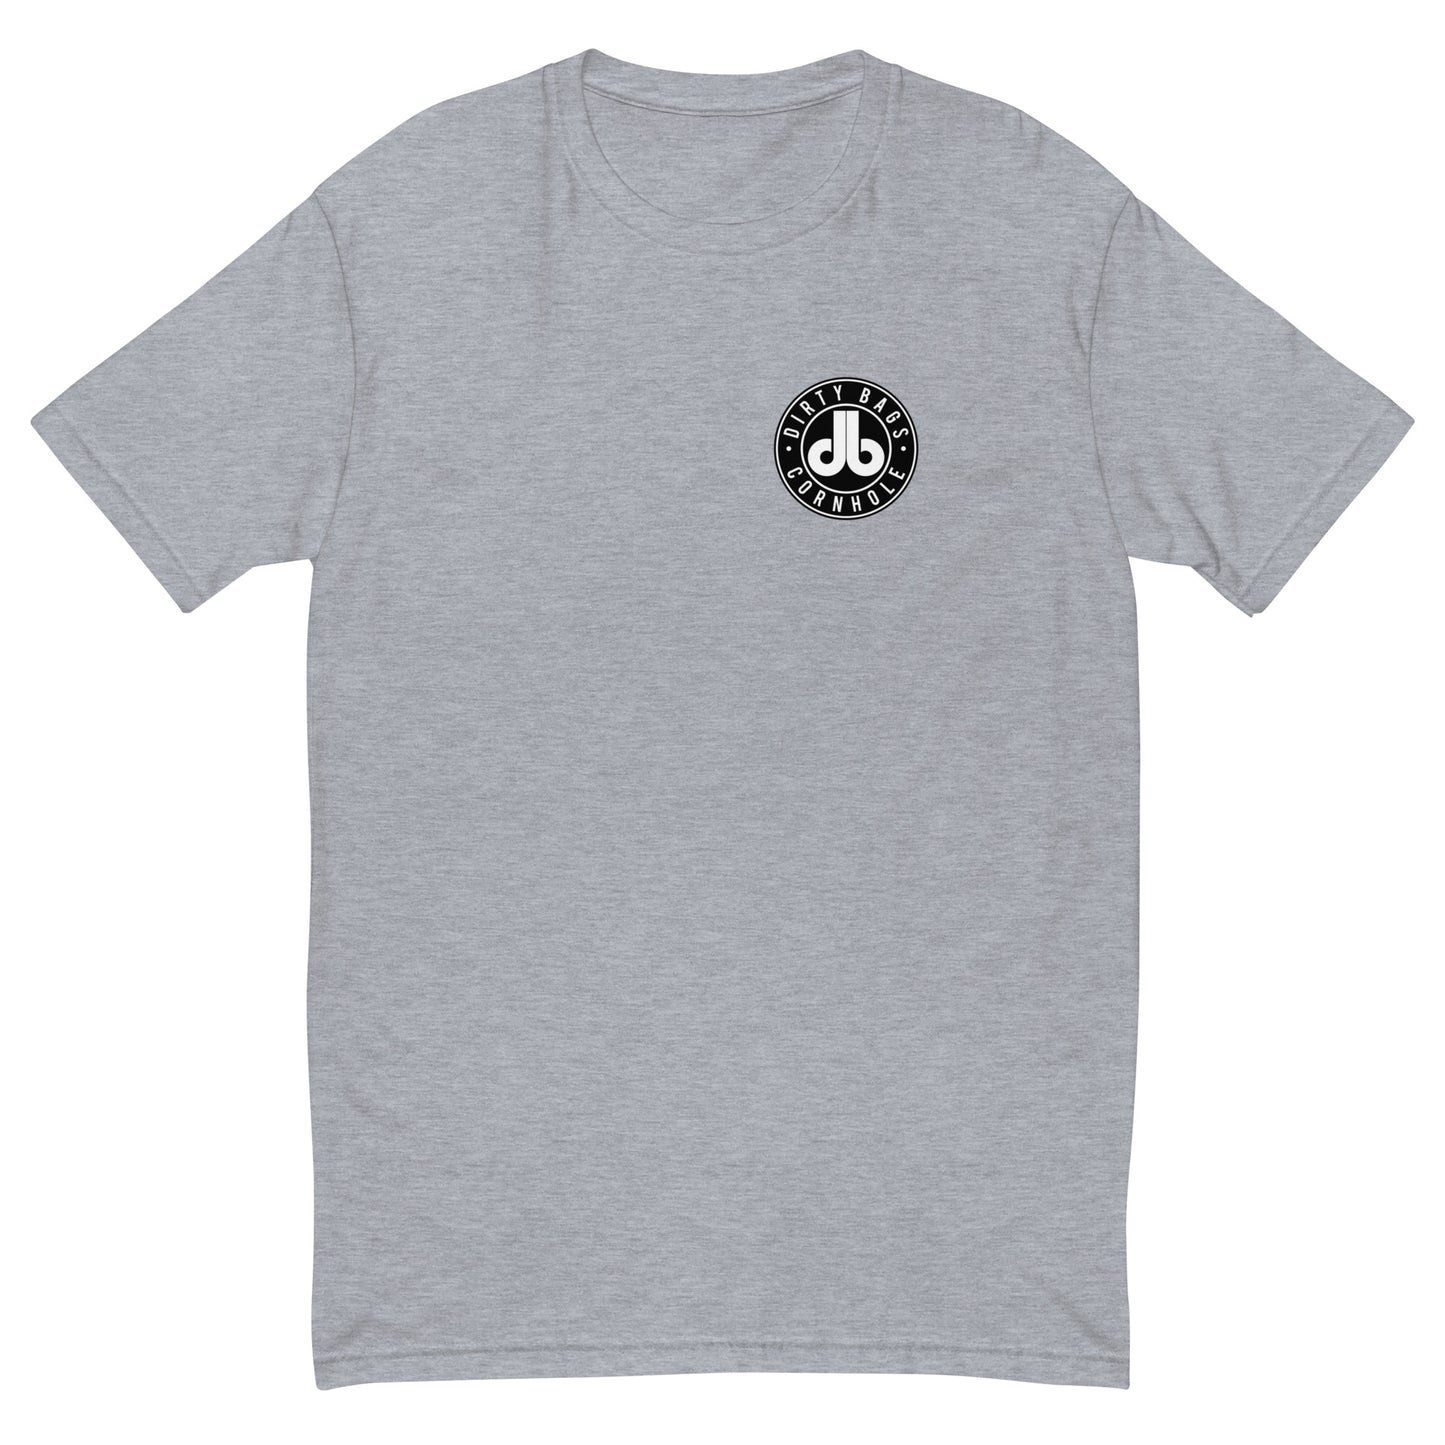 Airmails are Coming - Back Logo Tshirt